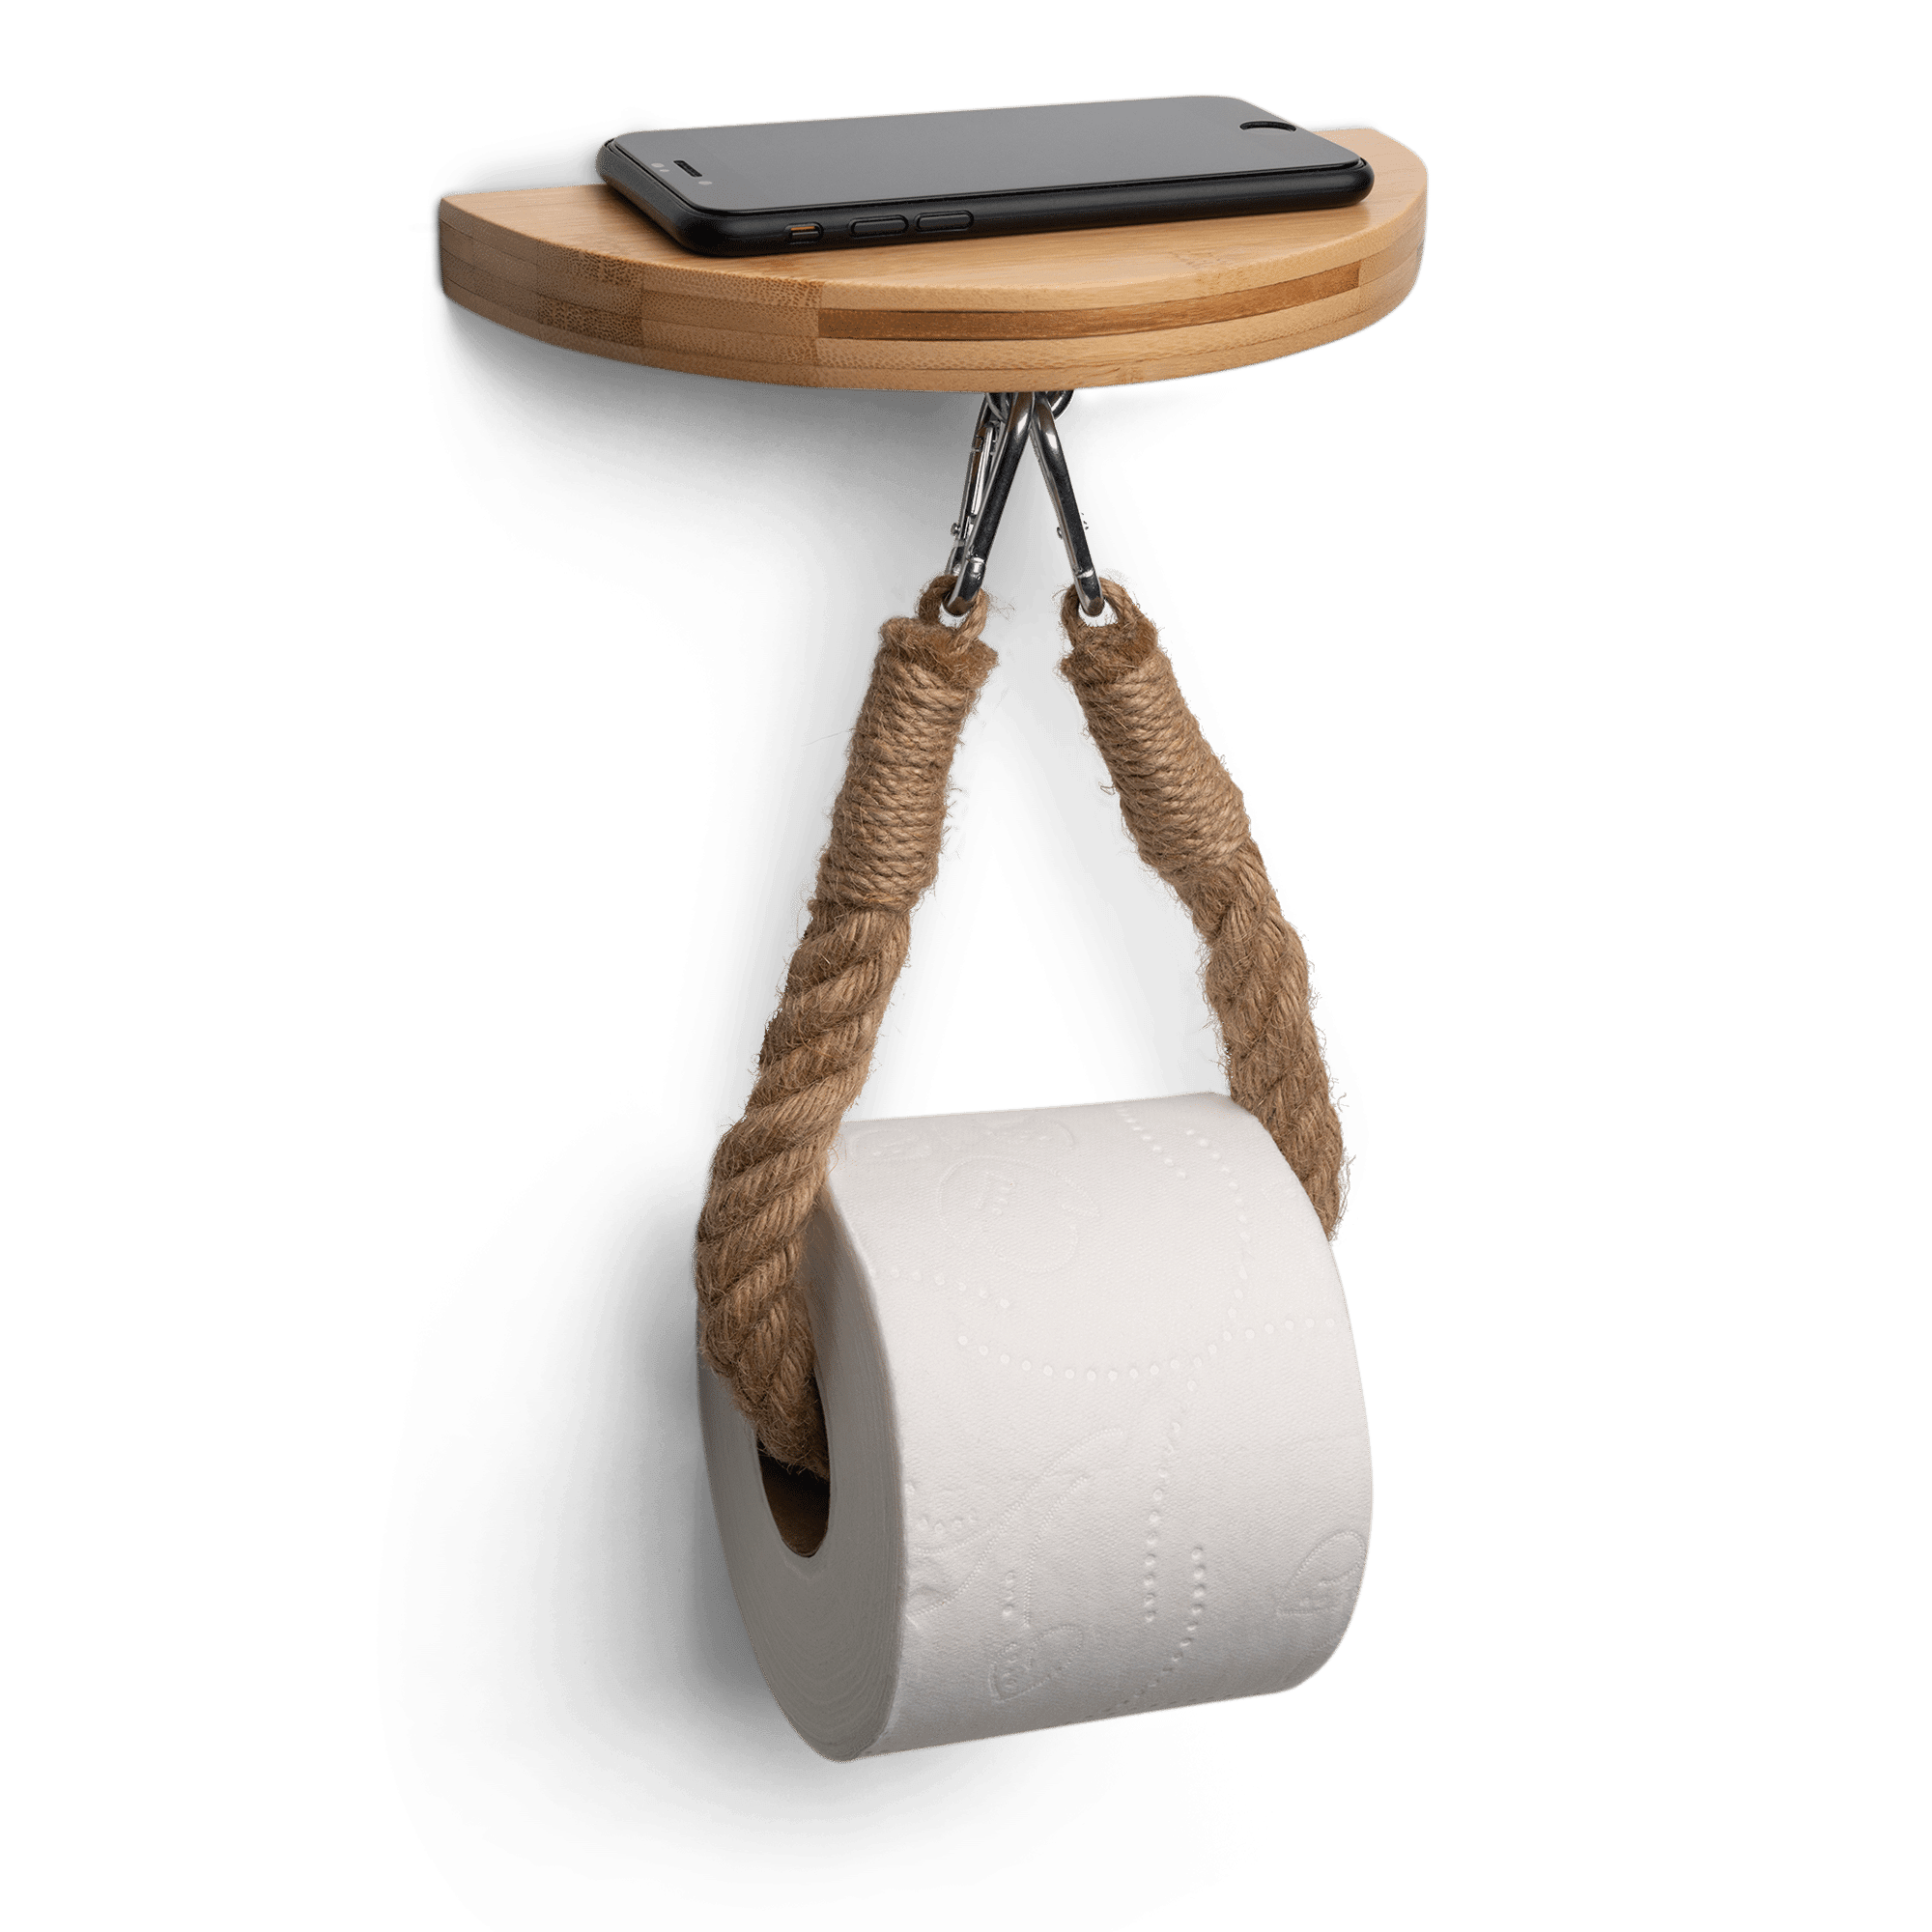 Bamboo Double Toilet Paper Roll Holder - Eco-Friendly and